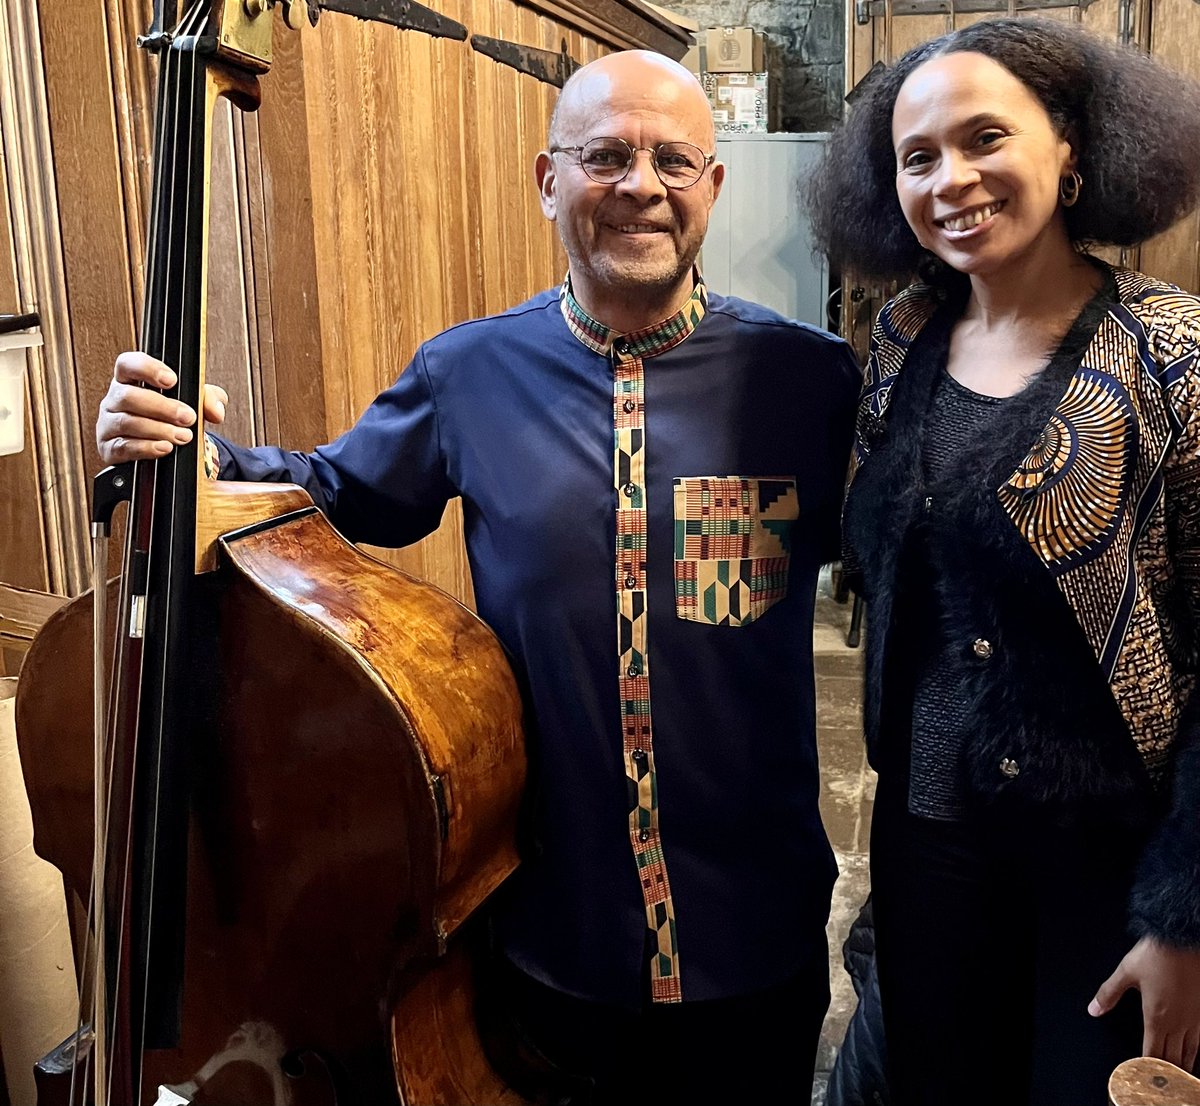 Leon @leonbosch & I have been working on a very soulful project “Spirituals” arranged for double bass & piano feat. some popular tunes but also some less familiar ones. We look forward to bringing this to @AfricanSeries @wigmore_hall Saturday, 17 Feb, 3pm wigmore-hall.org.uk/whats-on/20240…